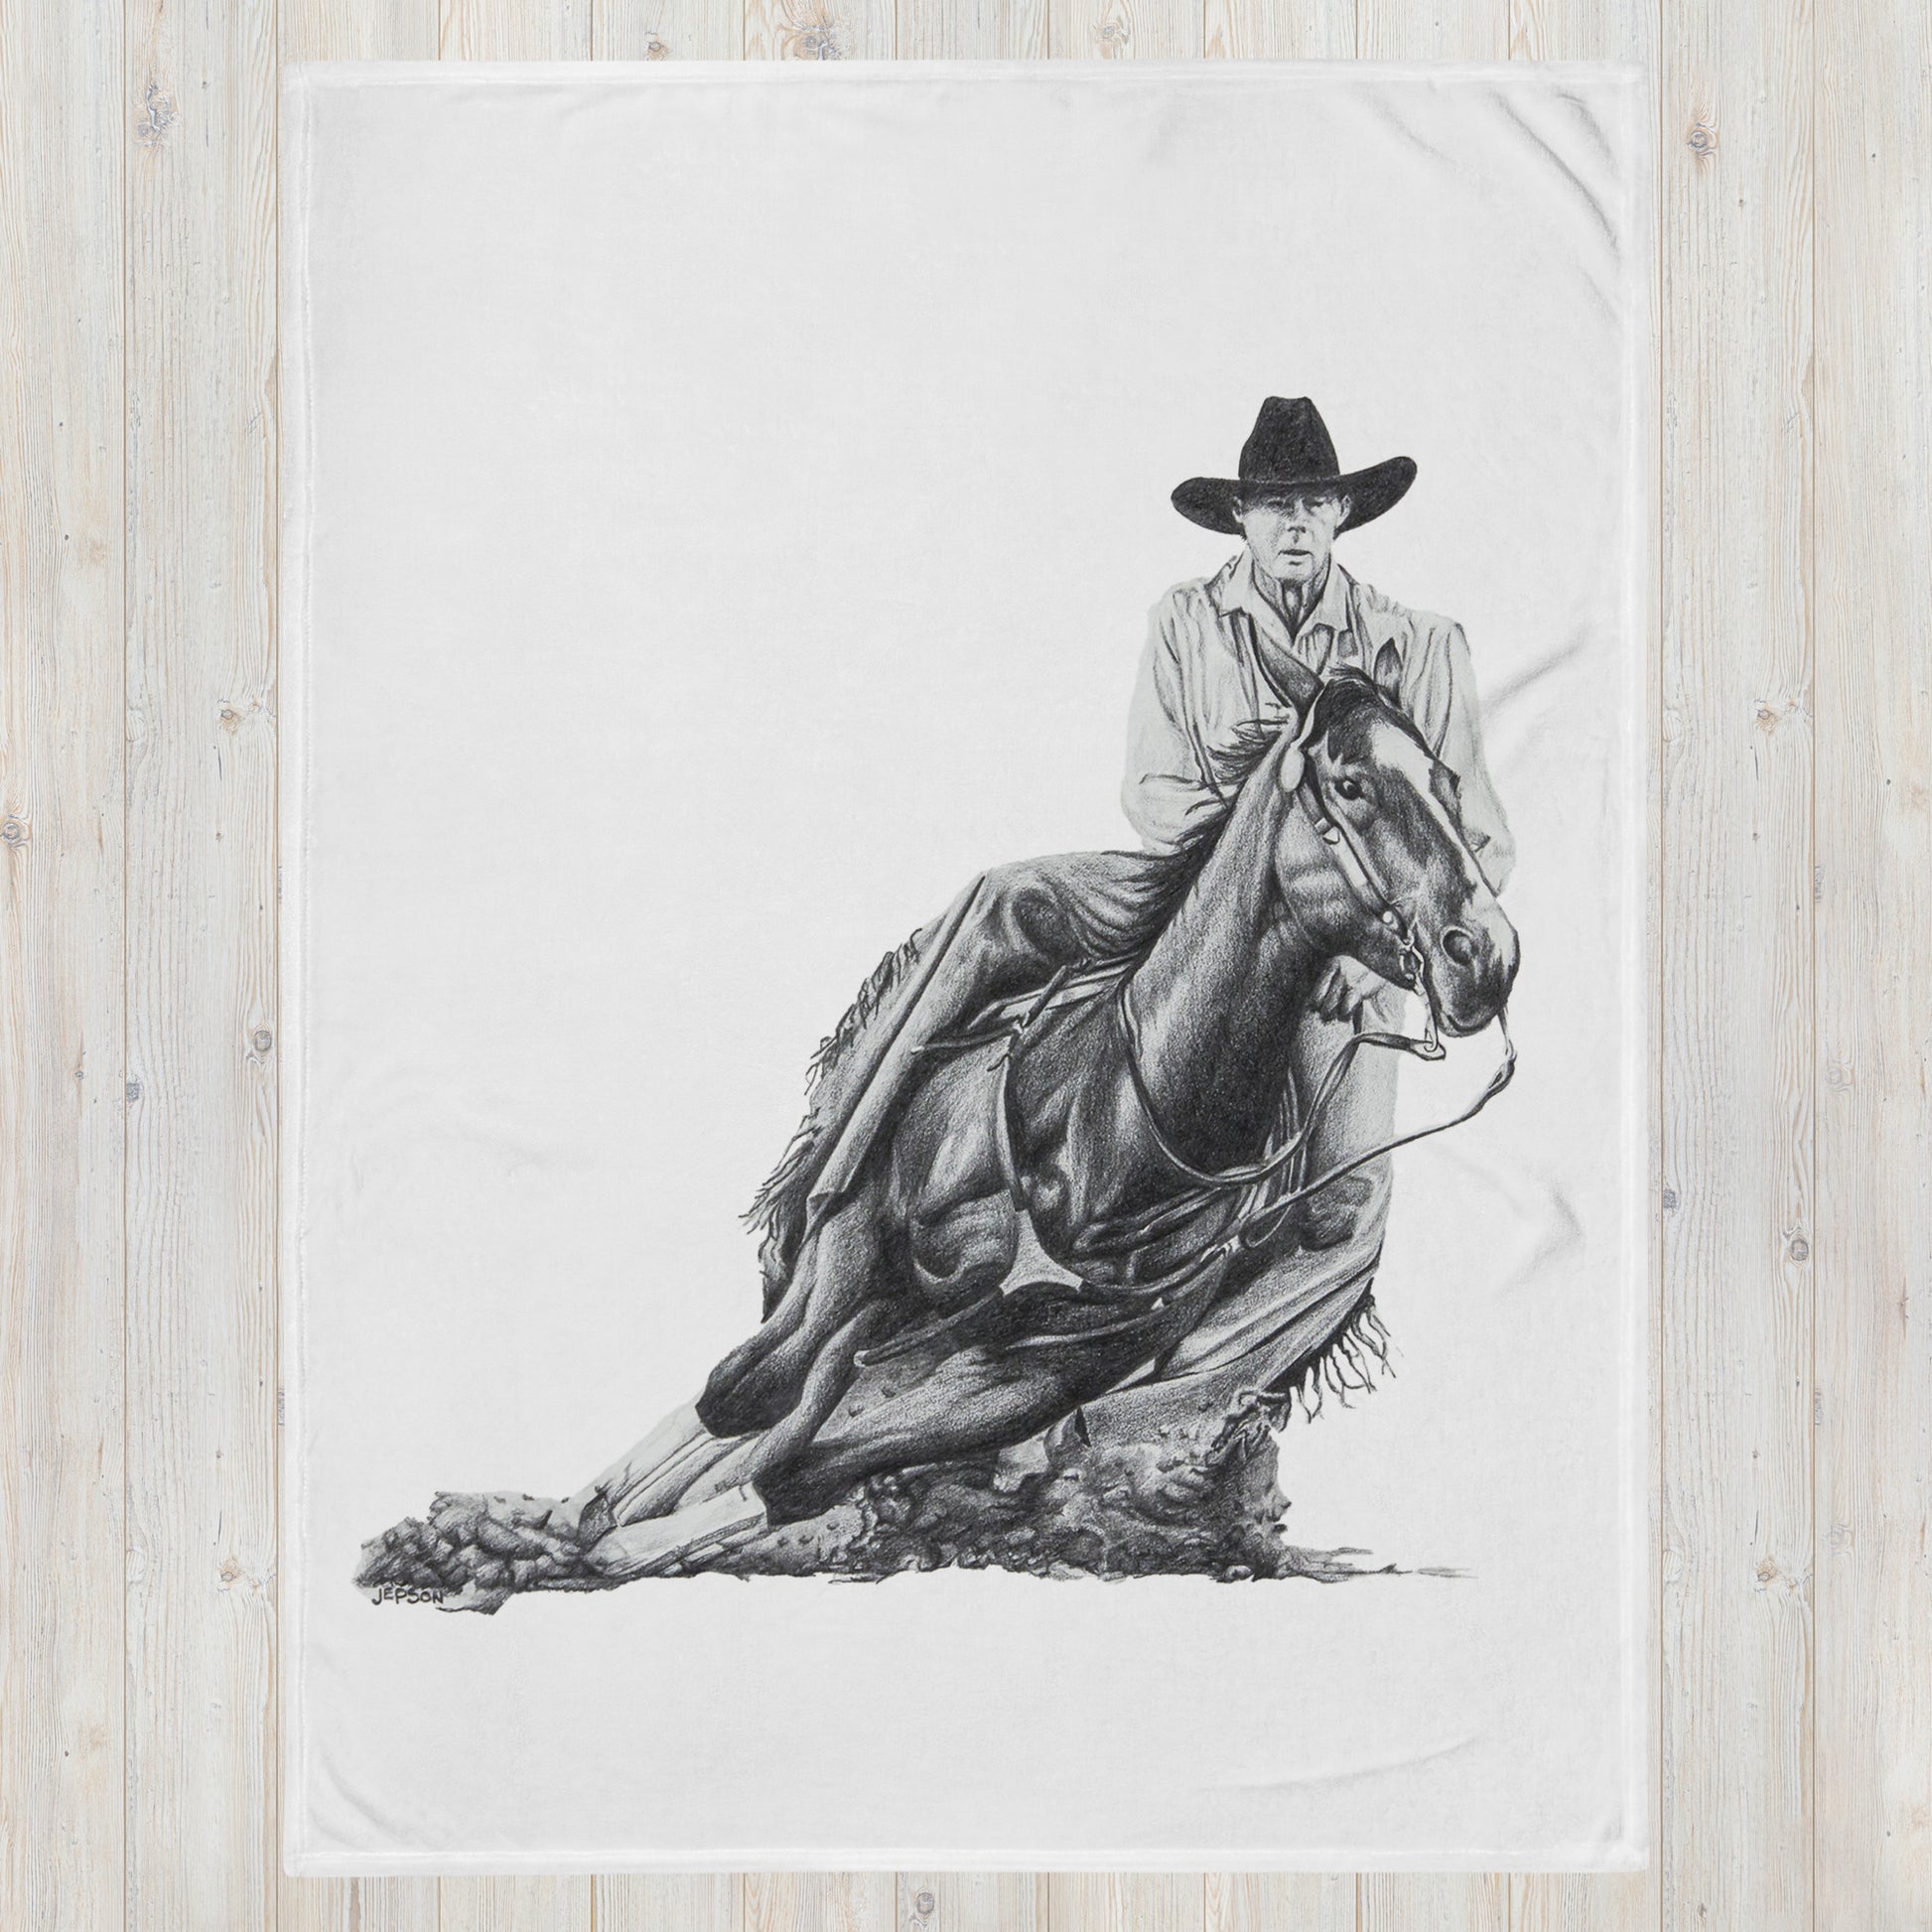 These "Cowboy Throw Blanket" are from a drawing of mine created with graphite pencil. It is titled "A Cut Above" as it is a cowboy on a cutting horse. It has been digitally optimized and transferred to a poly-cotton blend canvas.